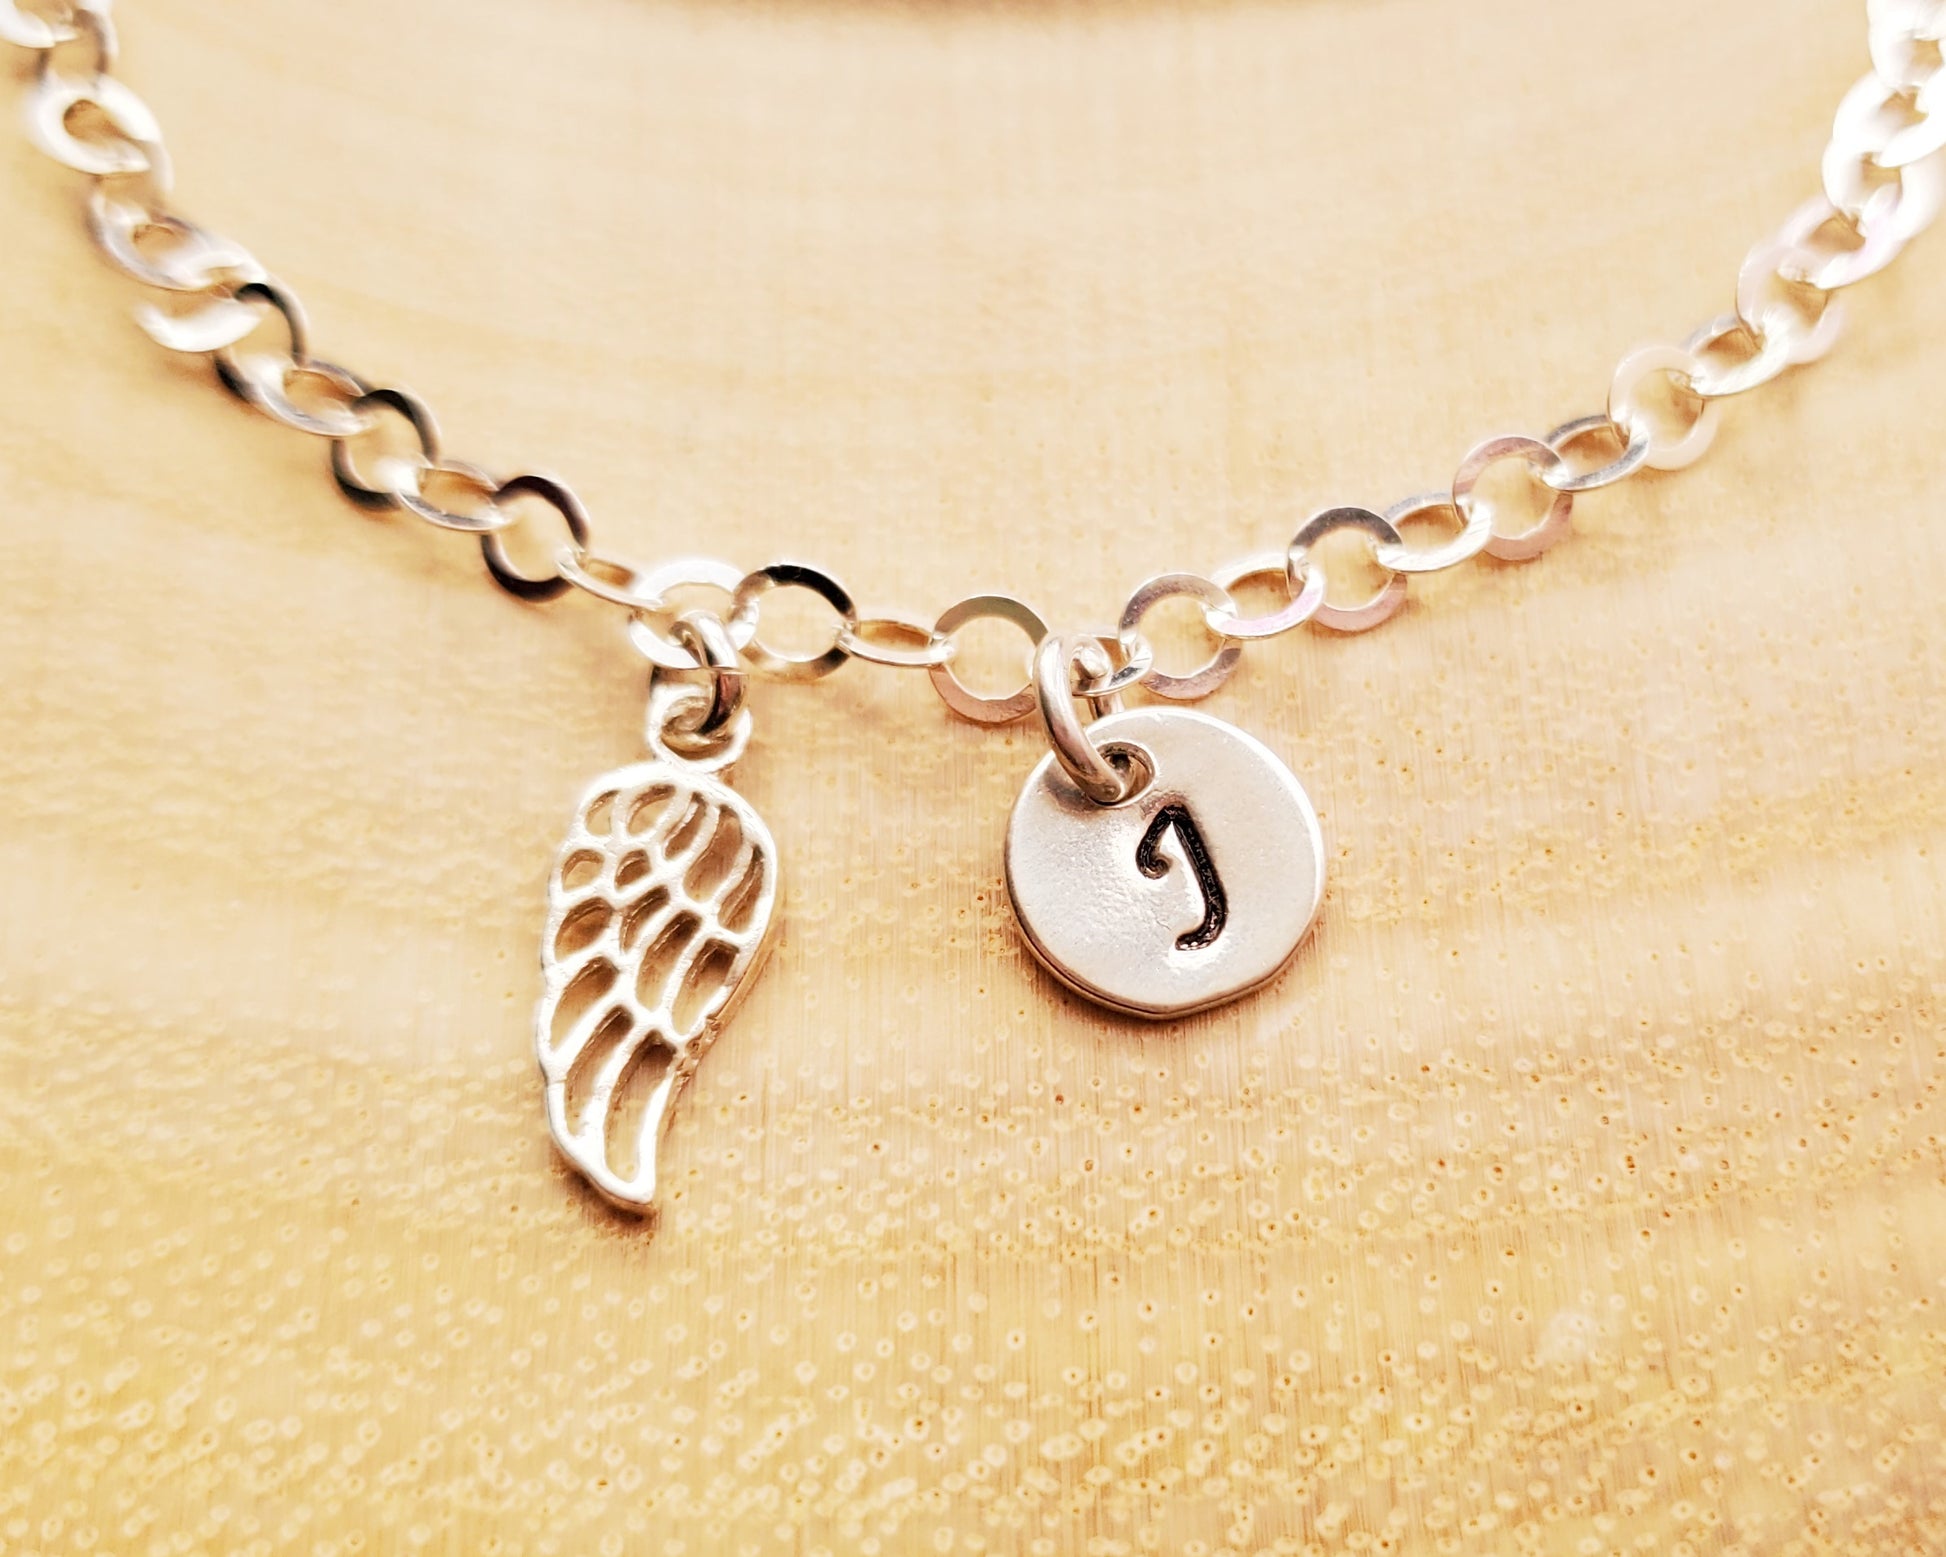 Deluxe Personalized Wing, Initial, Anklet, Ankle Bracelet, Sterling Silver pendants on Silver chain 